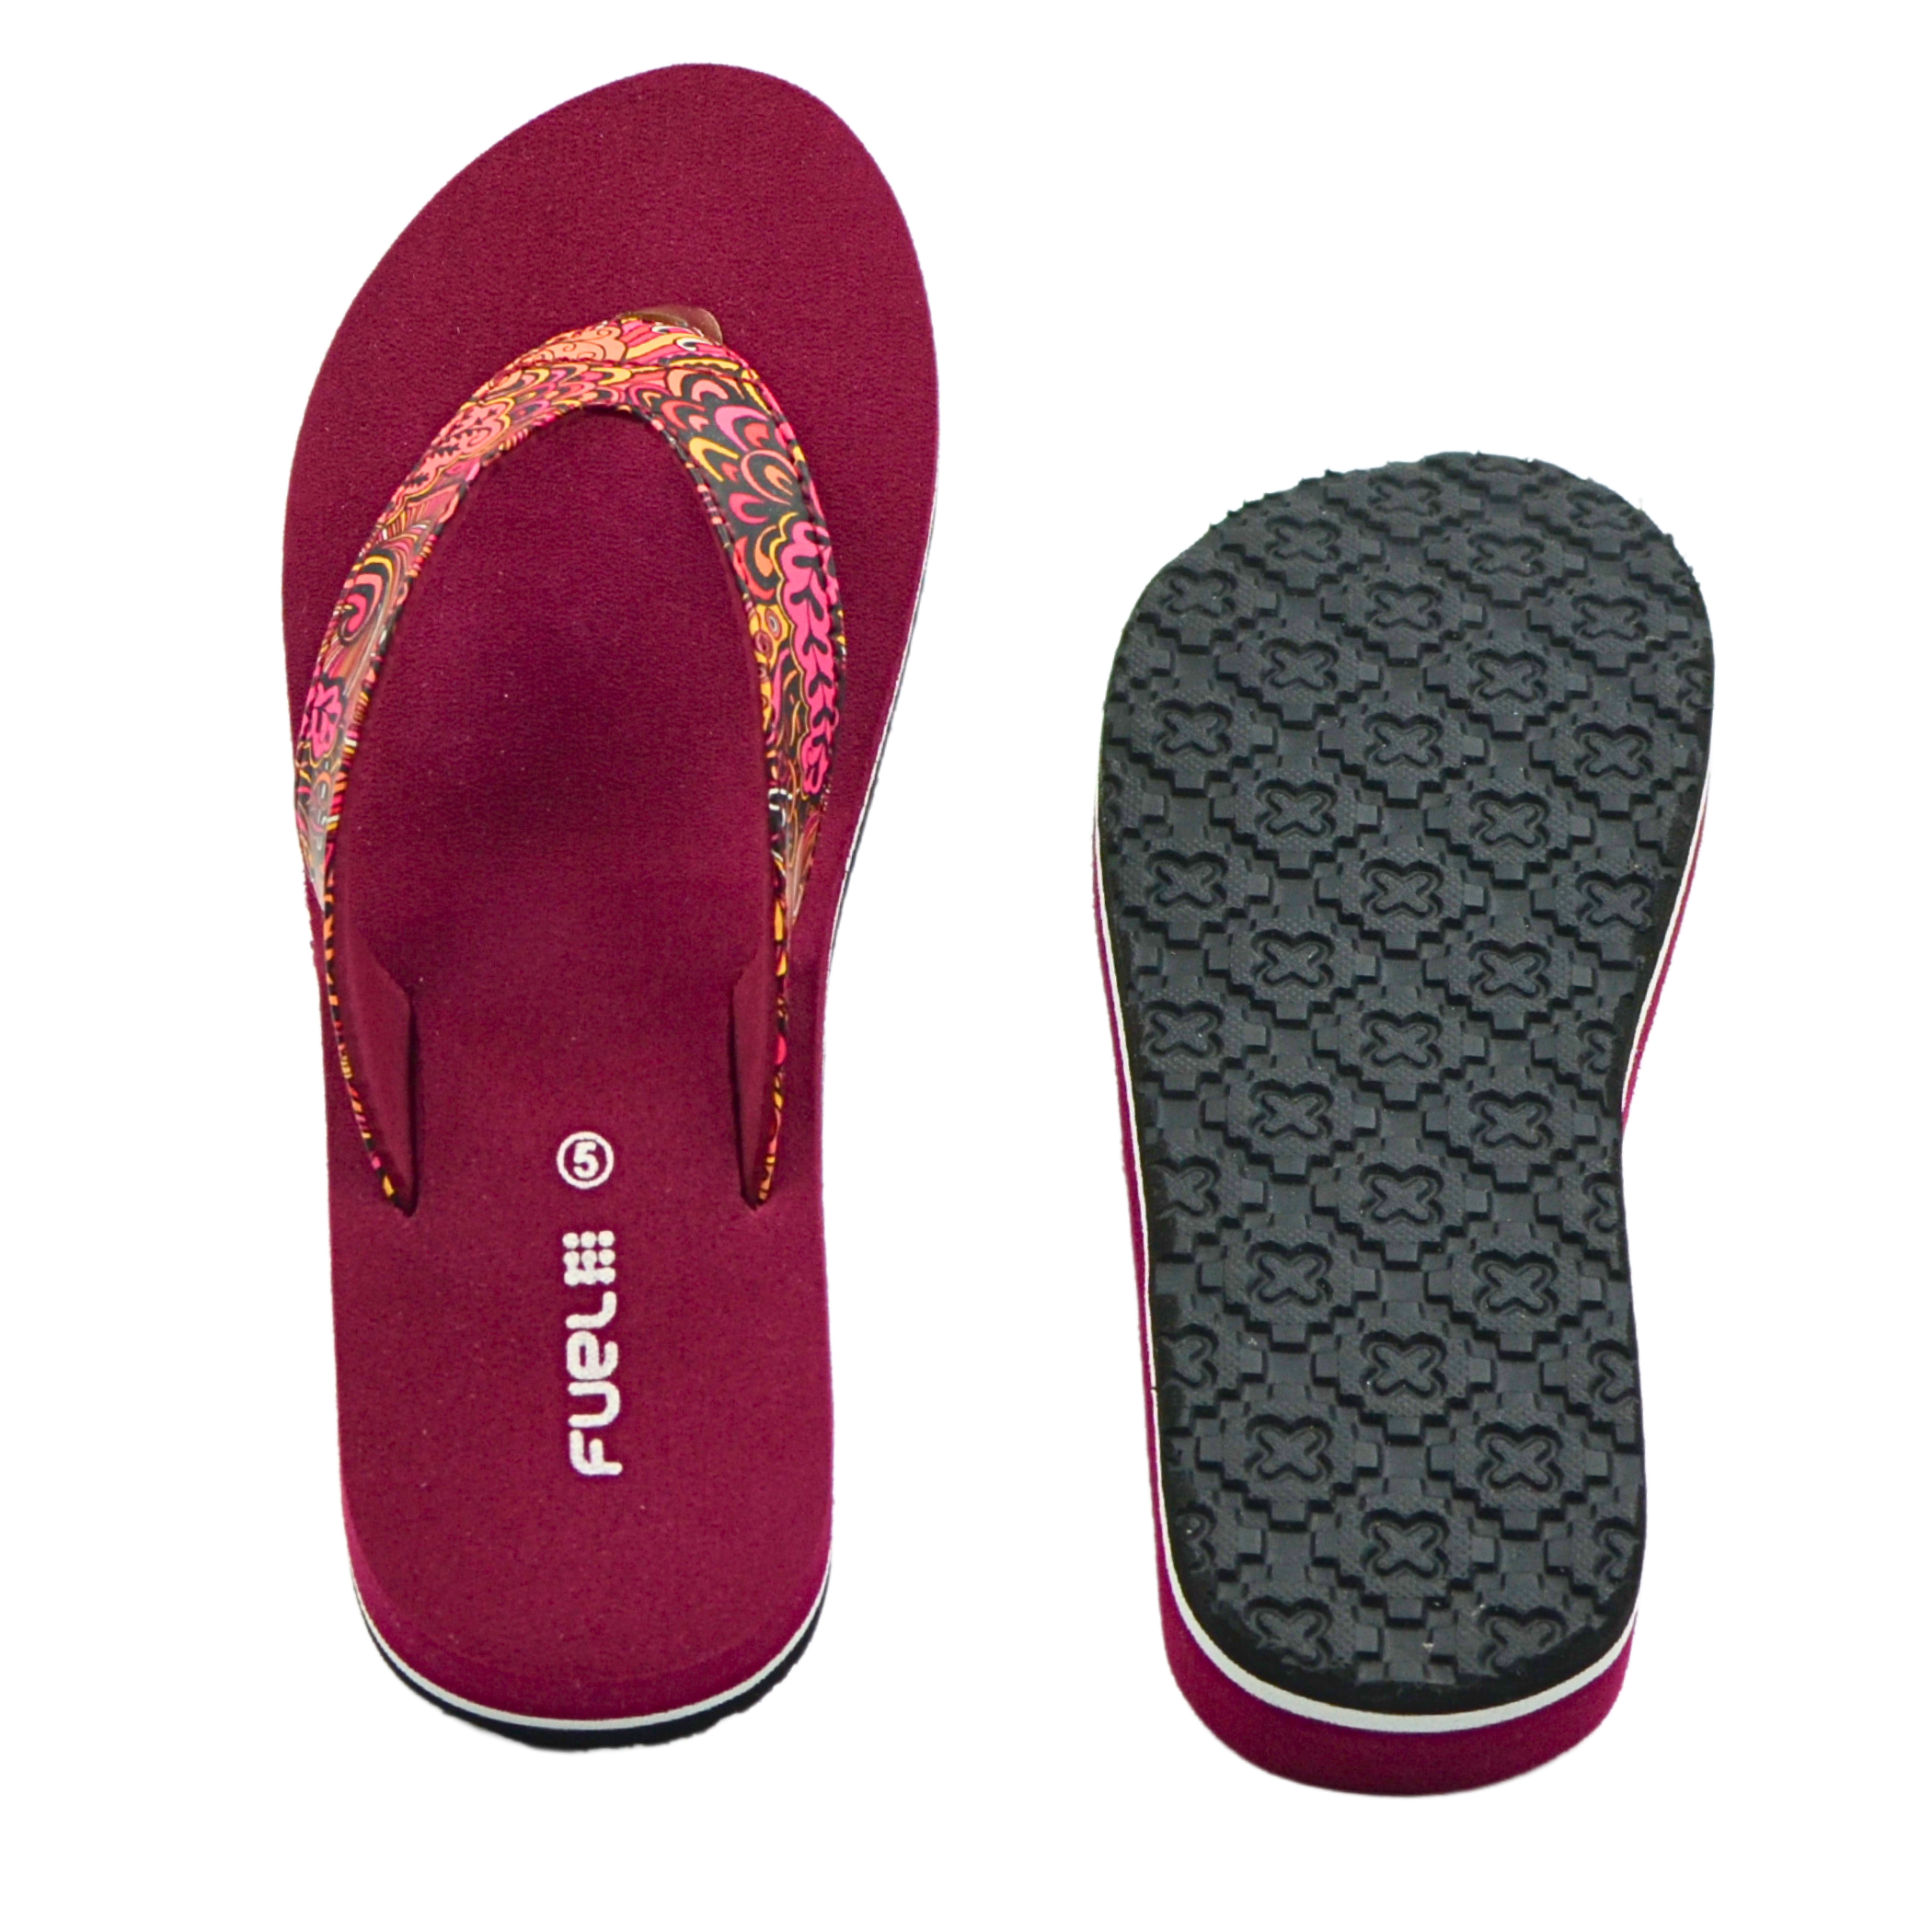 Women Belly Shoe in Nagpur at best price by Jain New Foot House - Justdial